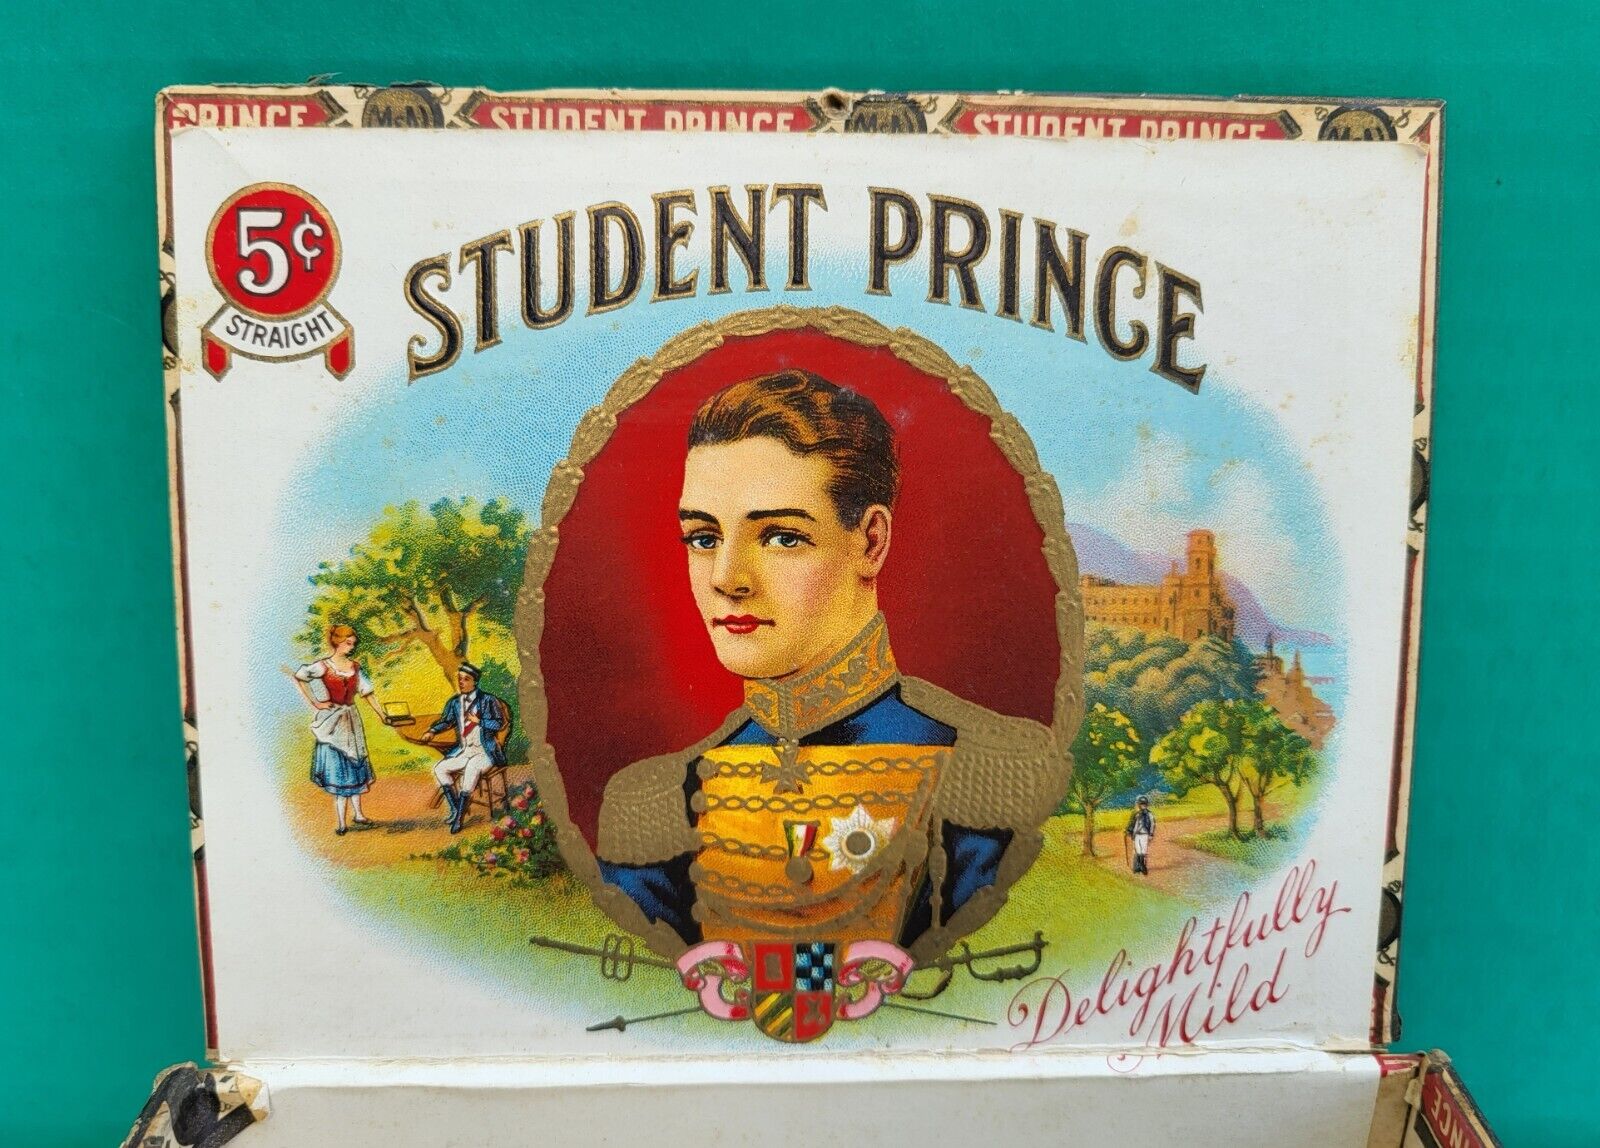 Student Prince Cigar Box Wood Wood Antique Early 1900s Tobacco